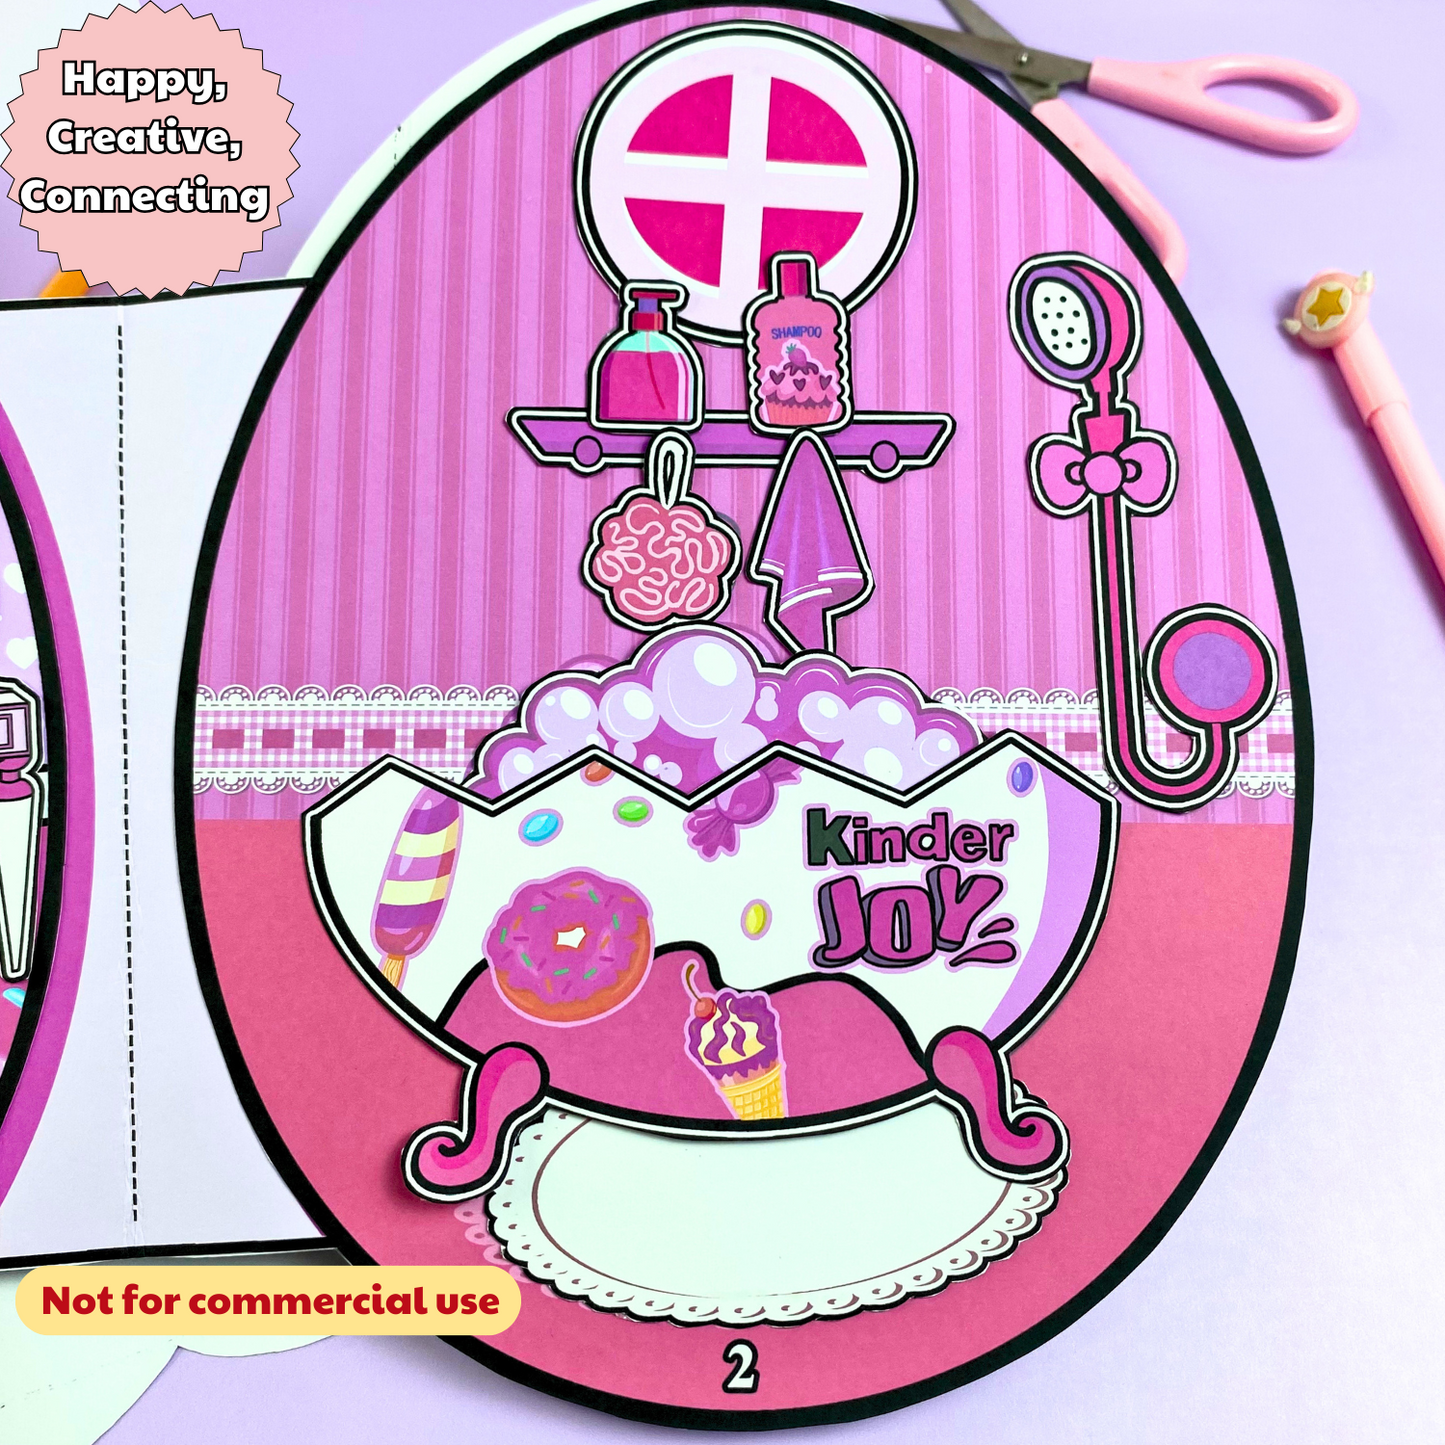 Education Activity Book | Pink Easter Egg Kinder Activity Book, Paper Doll House for Kids, Busy Book , DIY Crafts, Perfect Gifts for Girls